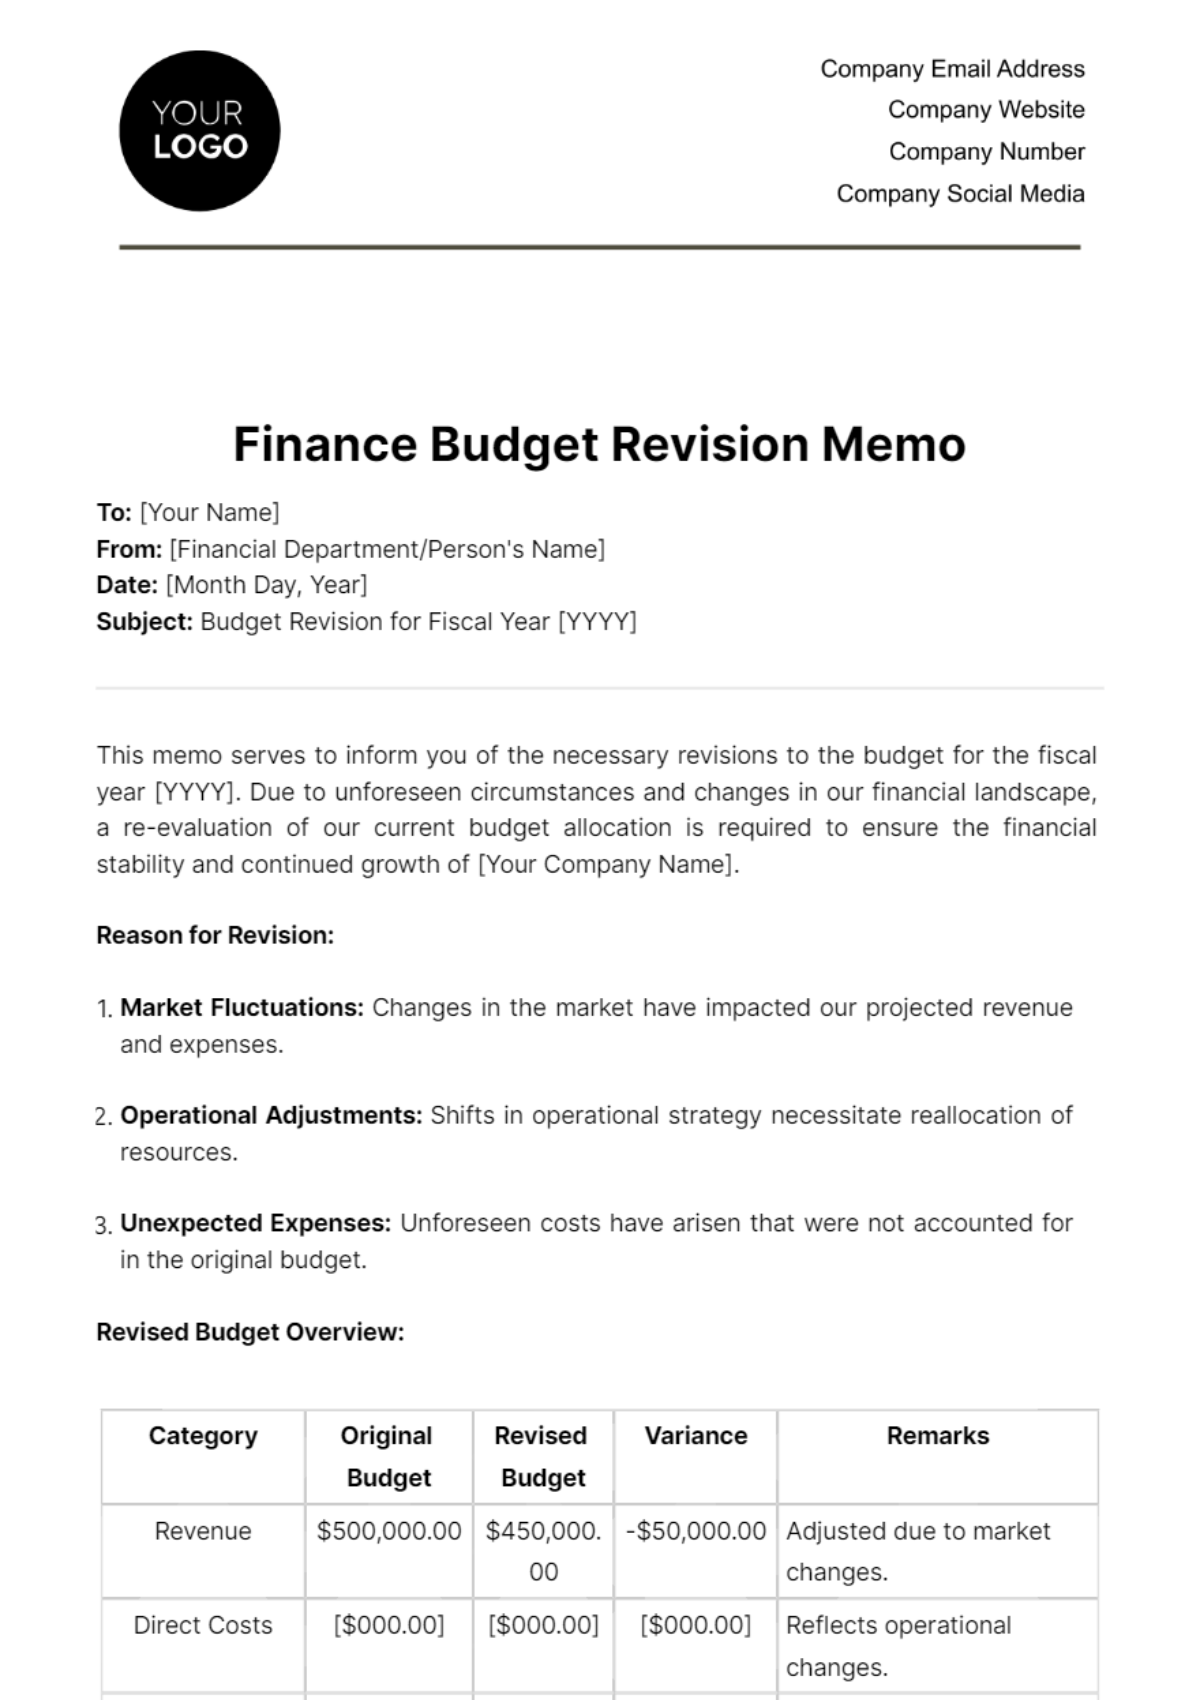 Free Finance Budget Revision Memo Template